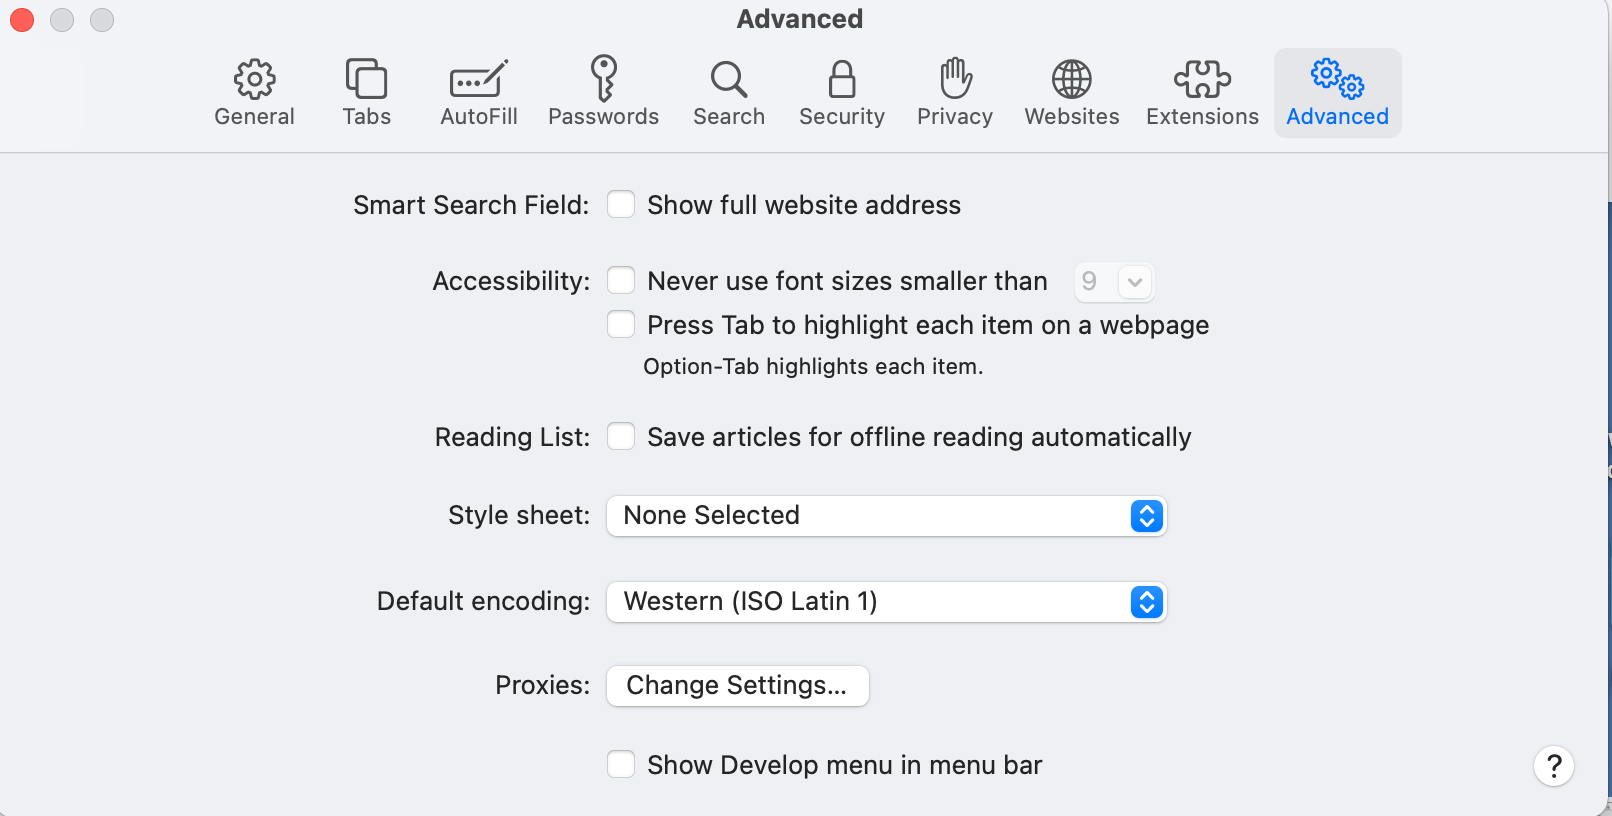 A screenshot of the Apple Safari web browser showing the Advanced menu in the browser's preferences window